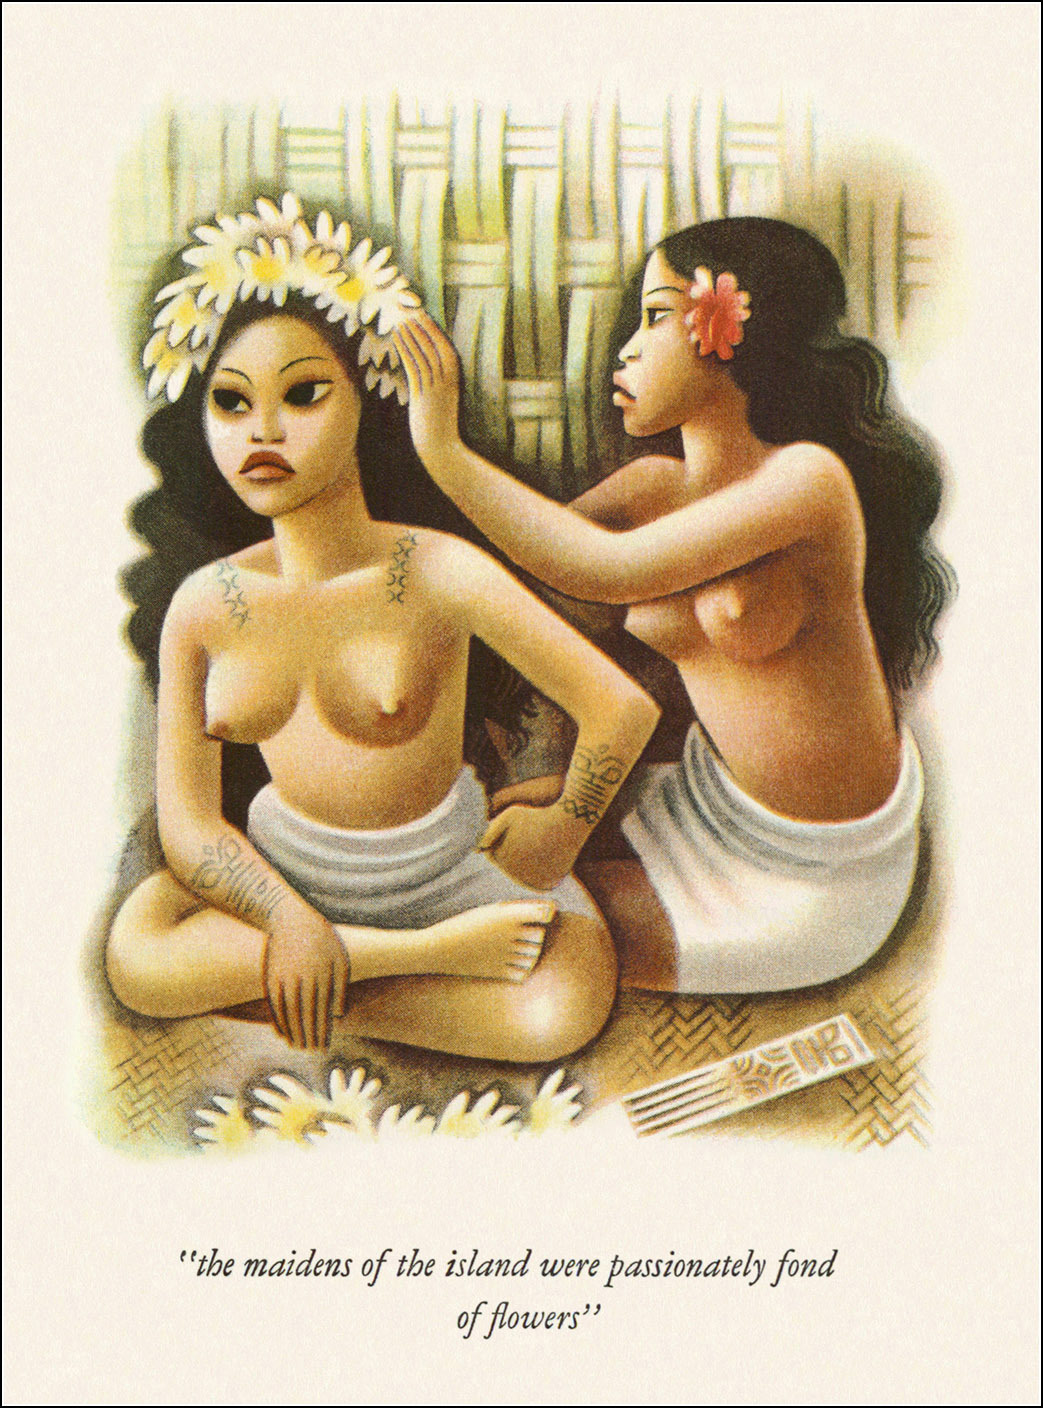 Illustration by Miguel Covarrubias, from Typee: A Romance of the South Seas, by